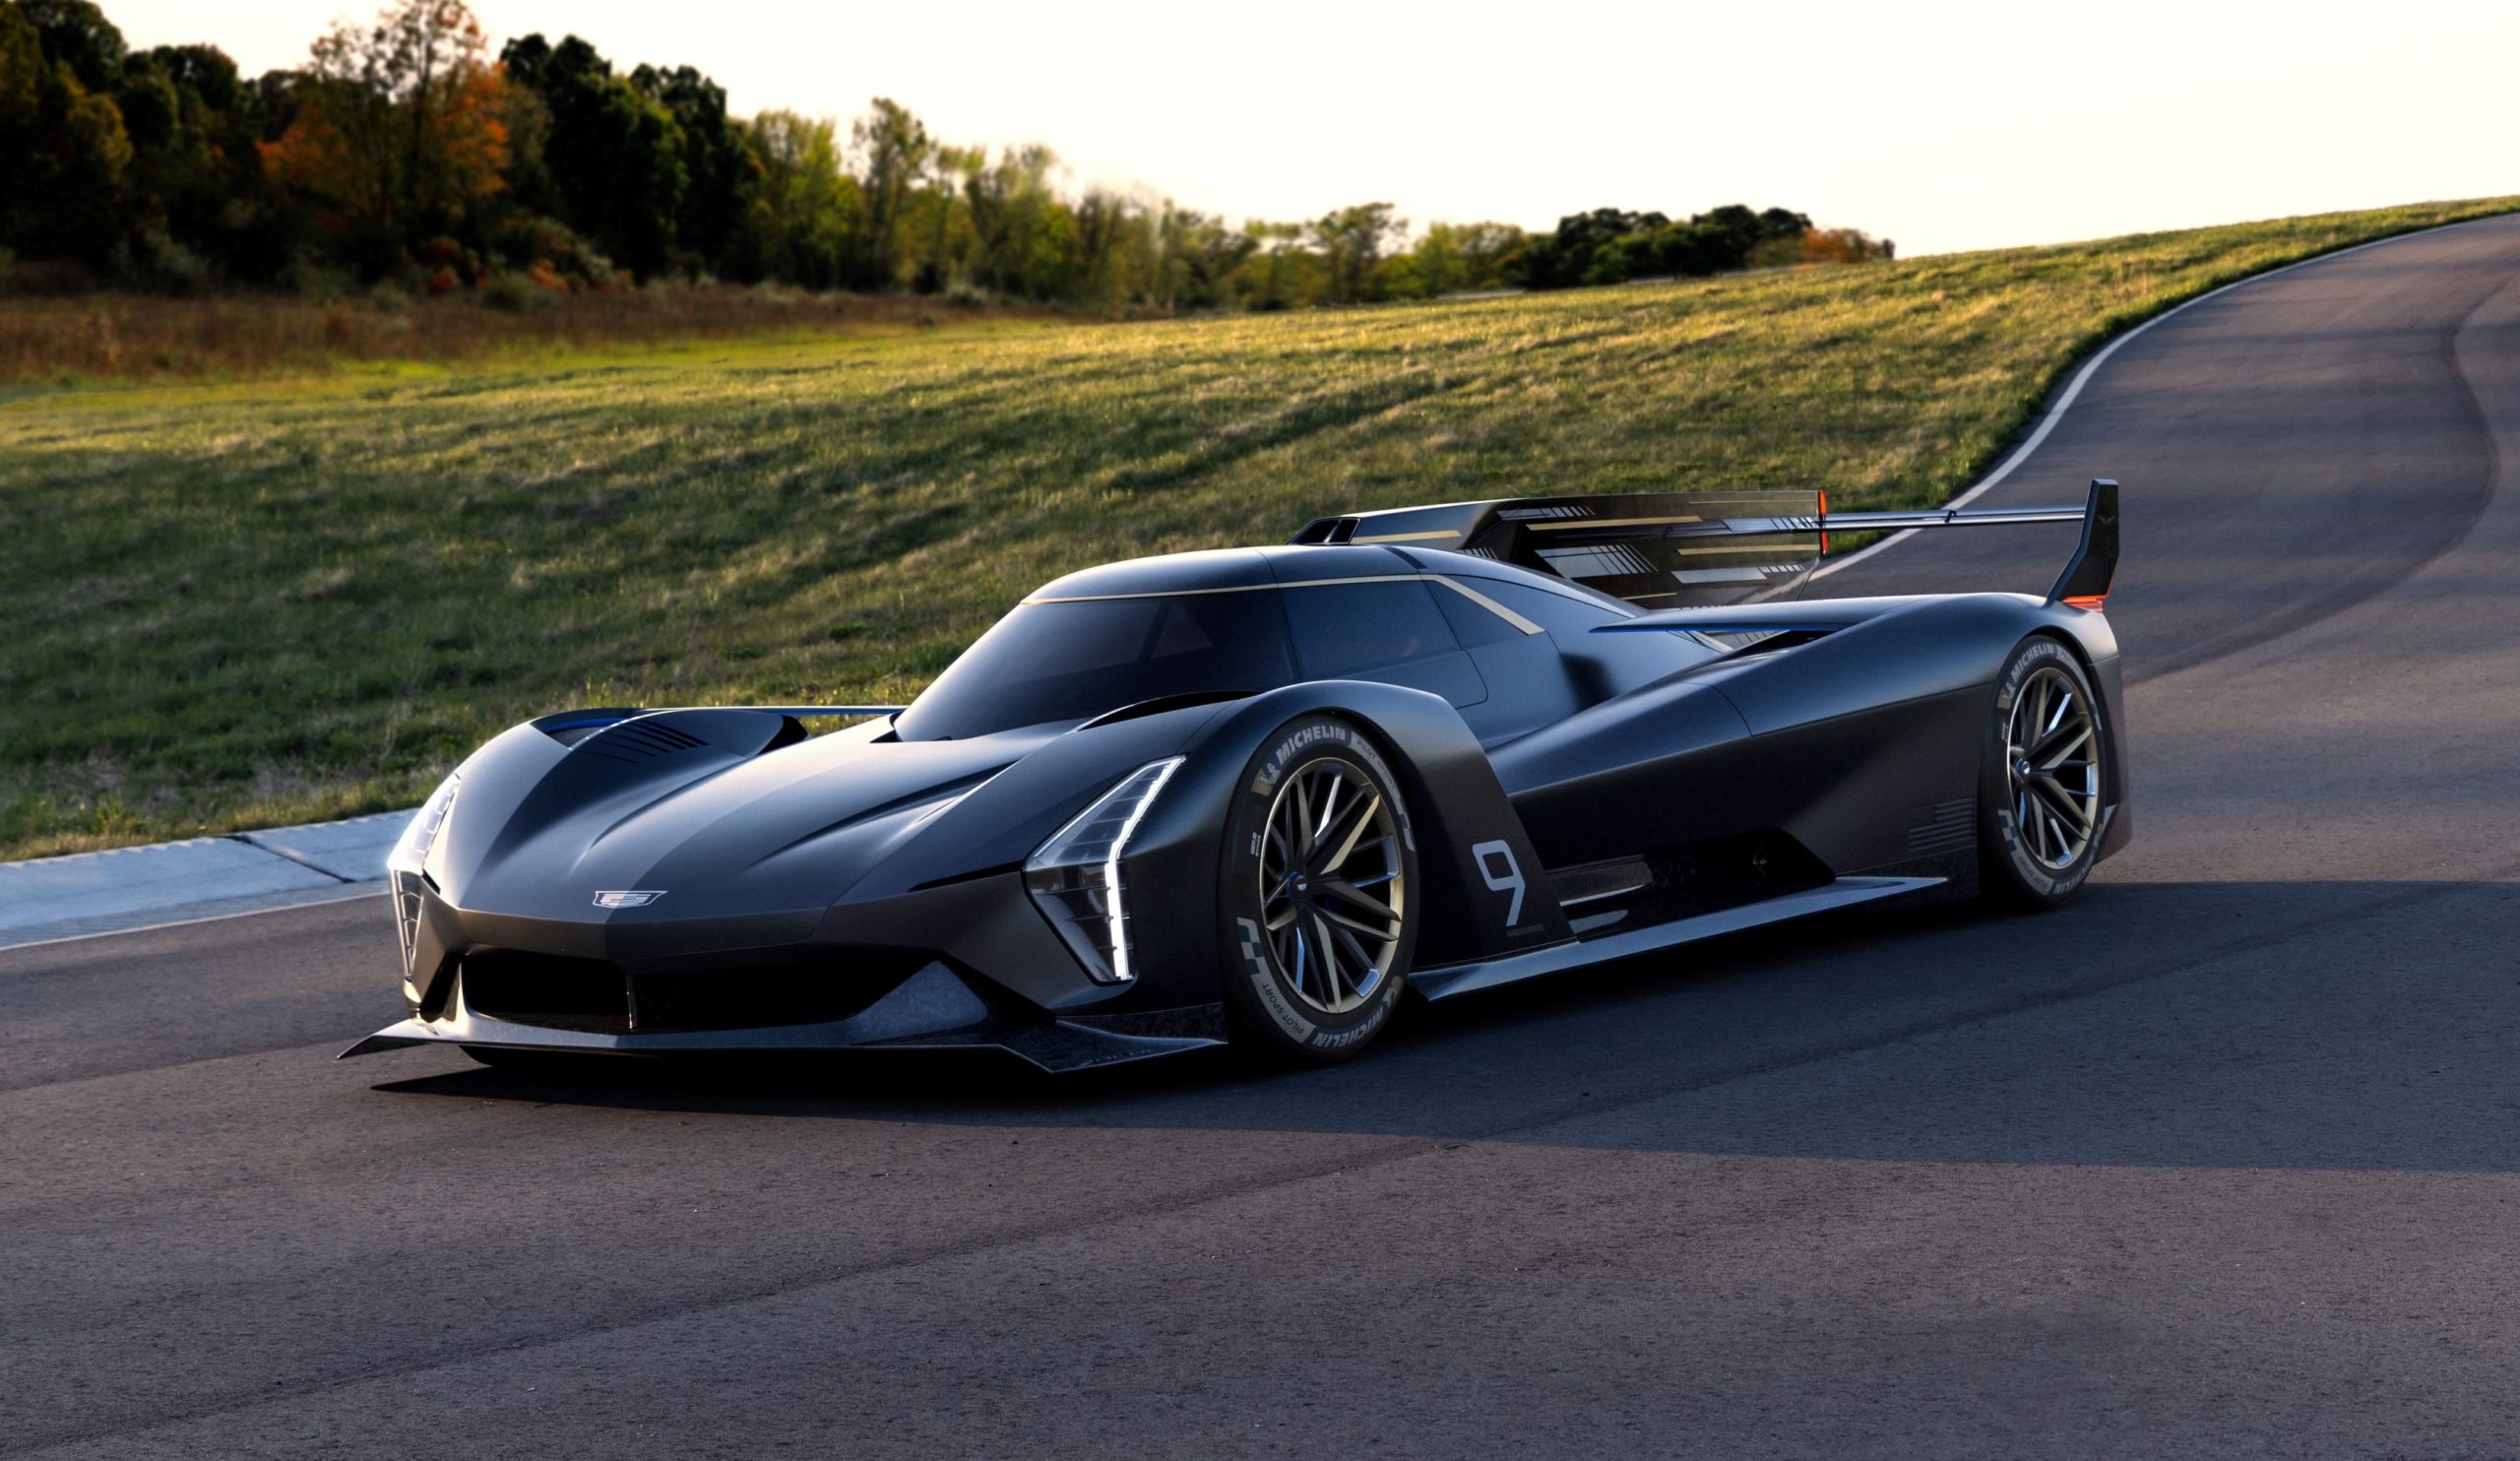 Cadillac unveils GTP hypercar ahead of 2023 debut